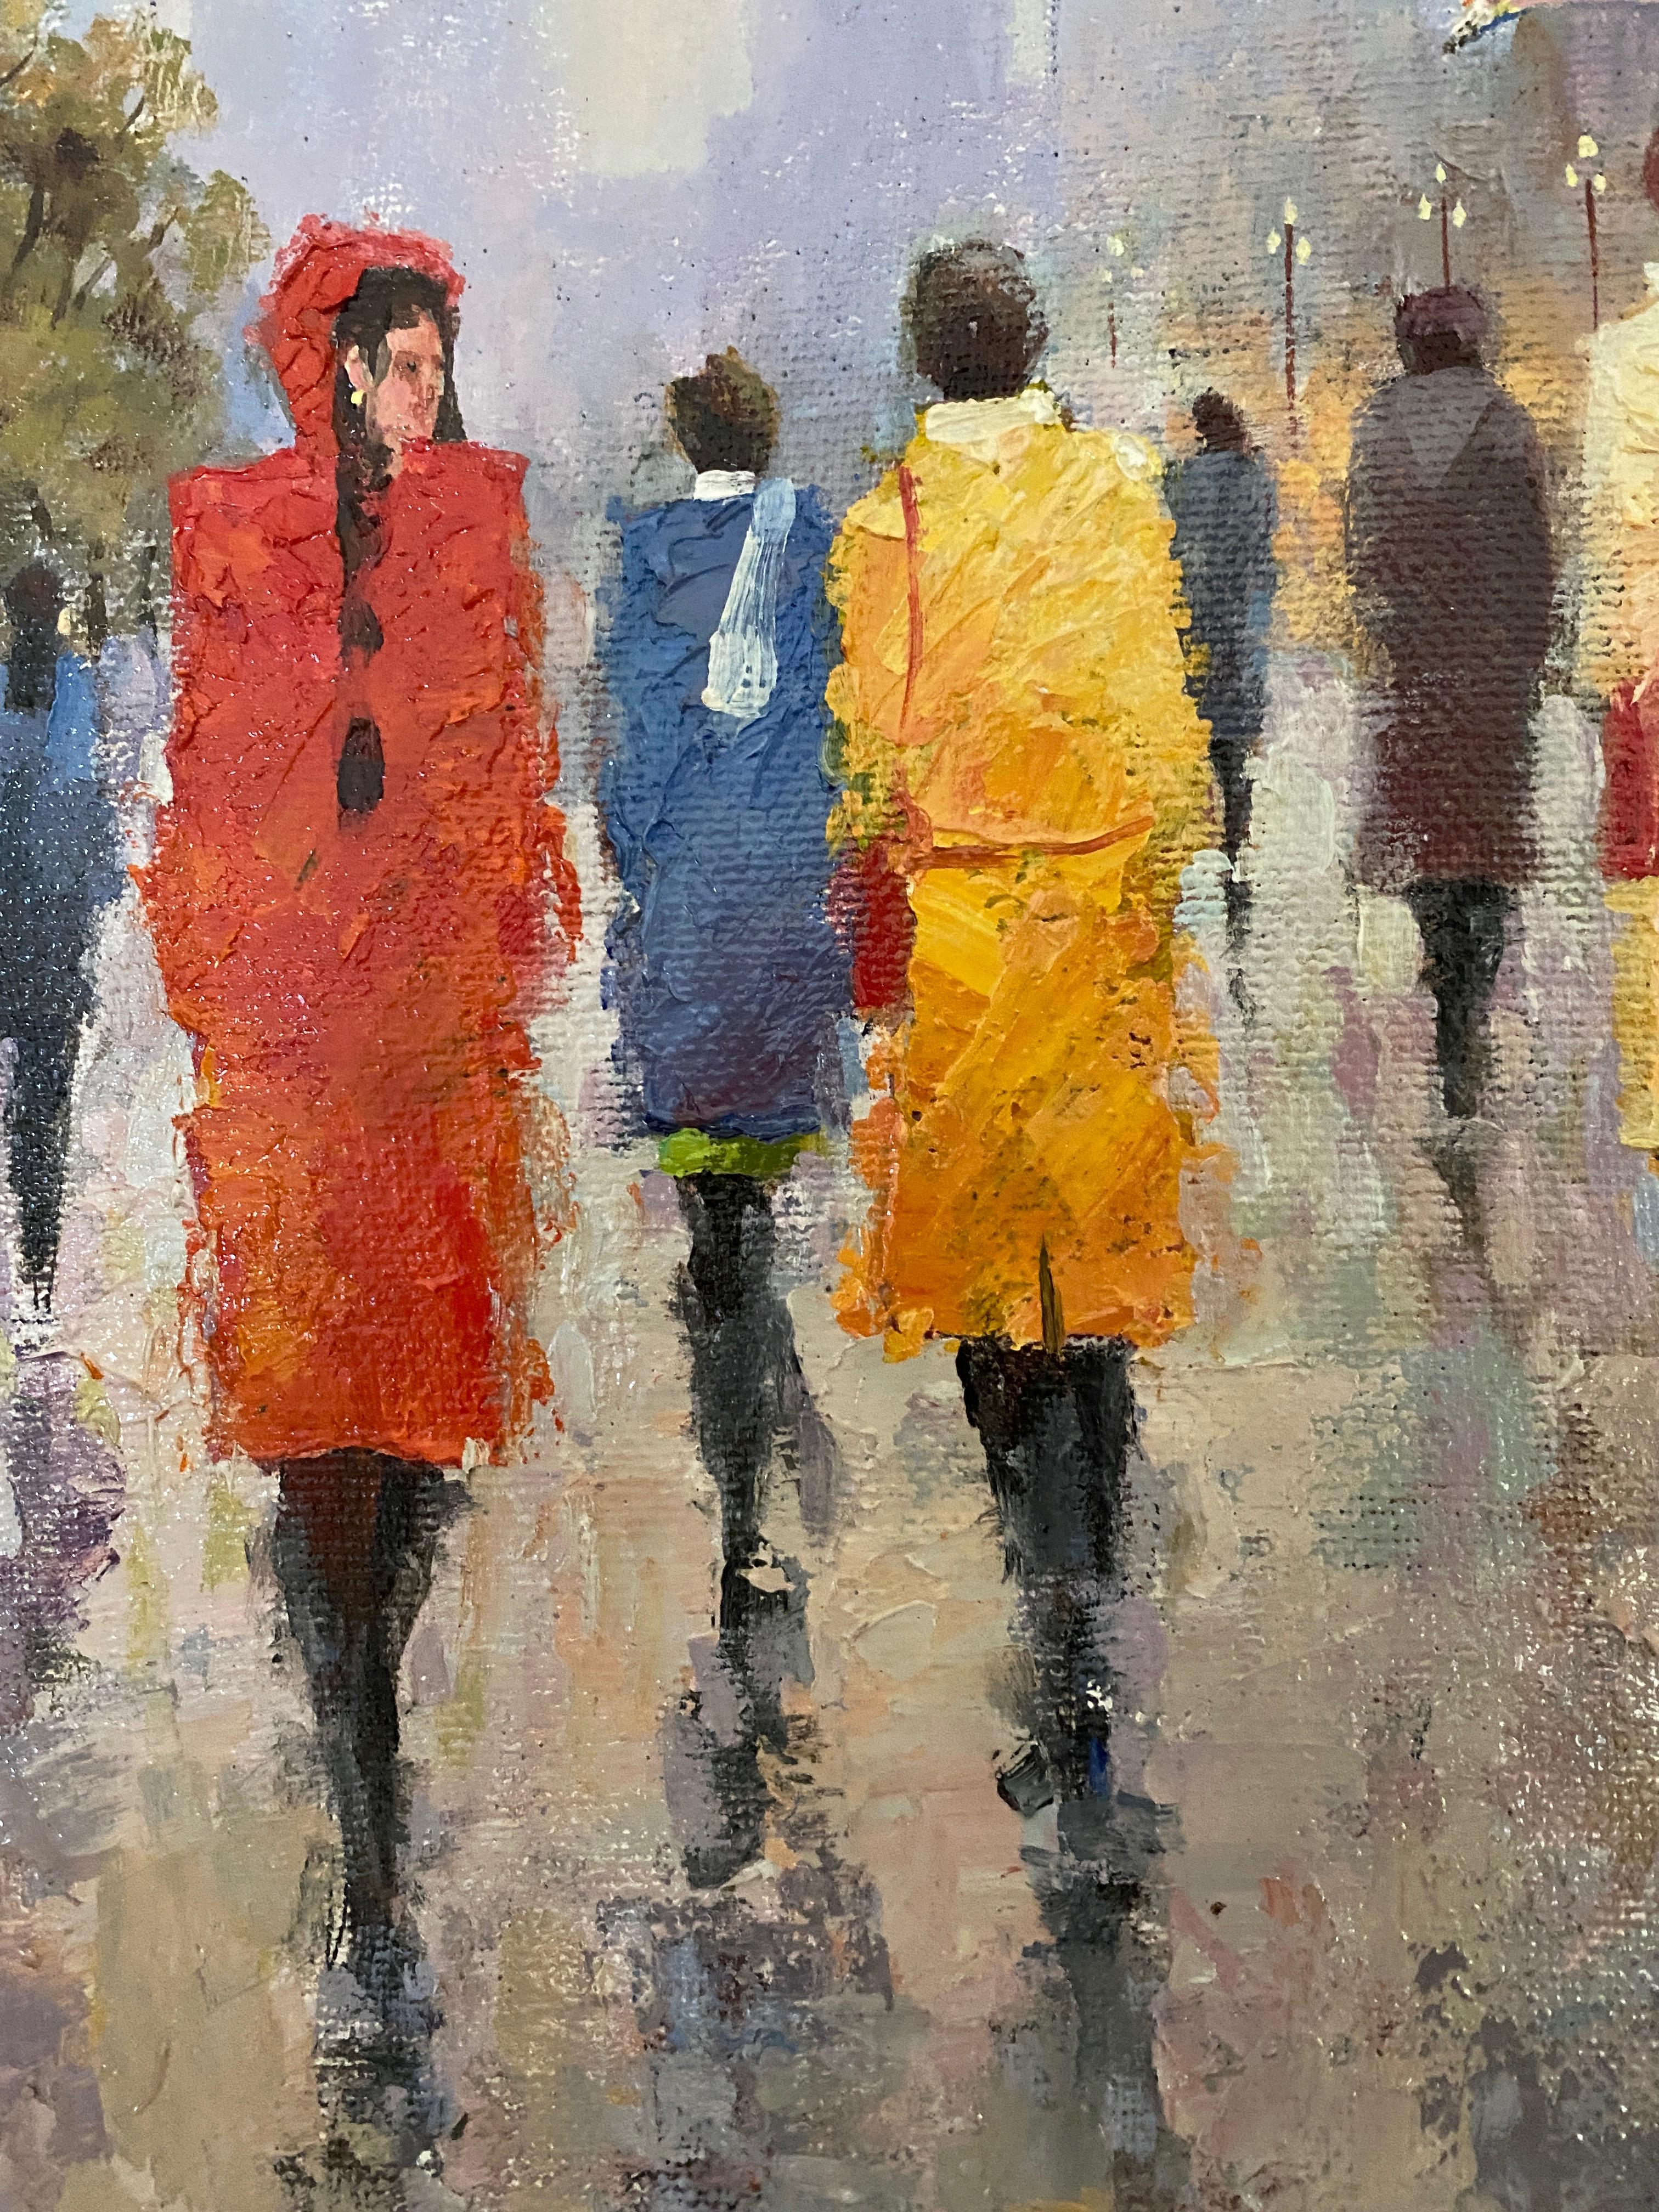 Rainy day. Oil on canvas by Vladimir Andreev. Impressionistic street scene.
Dimension art: 50 x 40 cm. Framed: 59 x 49 x 3,5 cm
In inches:  19.70 x 15.75   in. Framed:  23.23 x 19.3 0 x 1.38 in.
Signed 